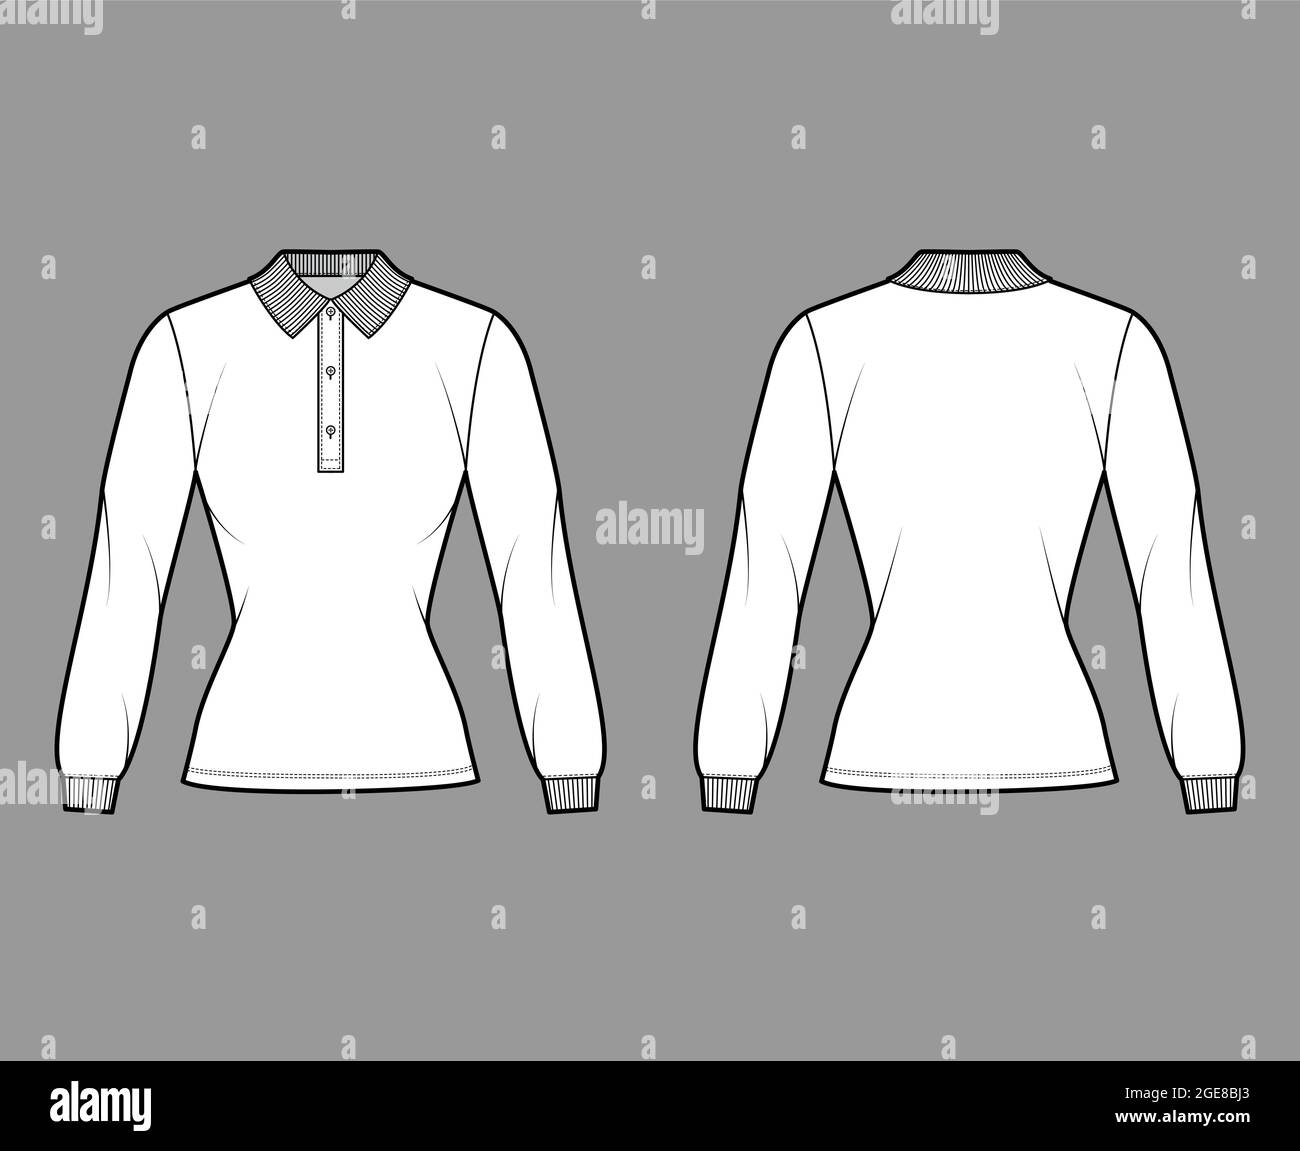 Shirt polo fitted technical fashion illustration with long sleeves, tunic length, henley neck, flat knit collar. Apparel top outwear template front, back white color style. Women men unisex CAD mockup Stock Vector